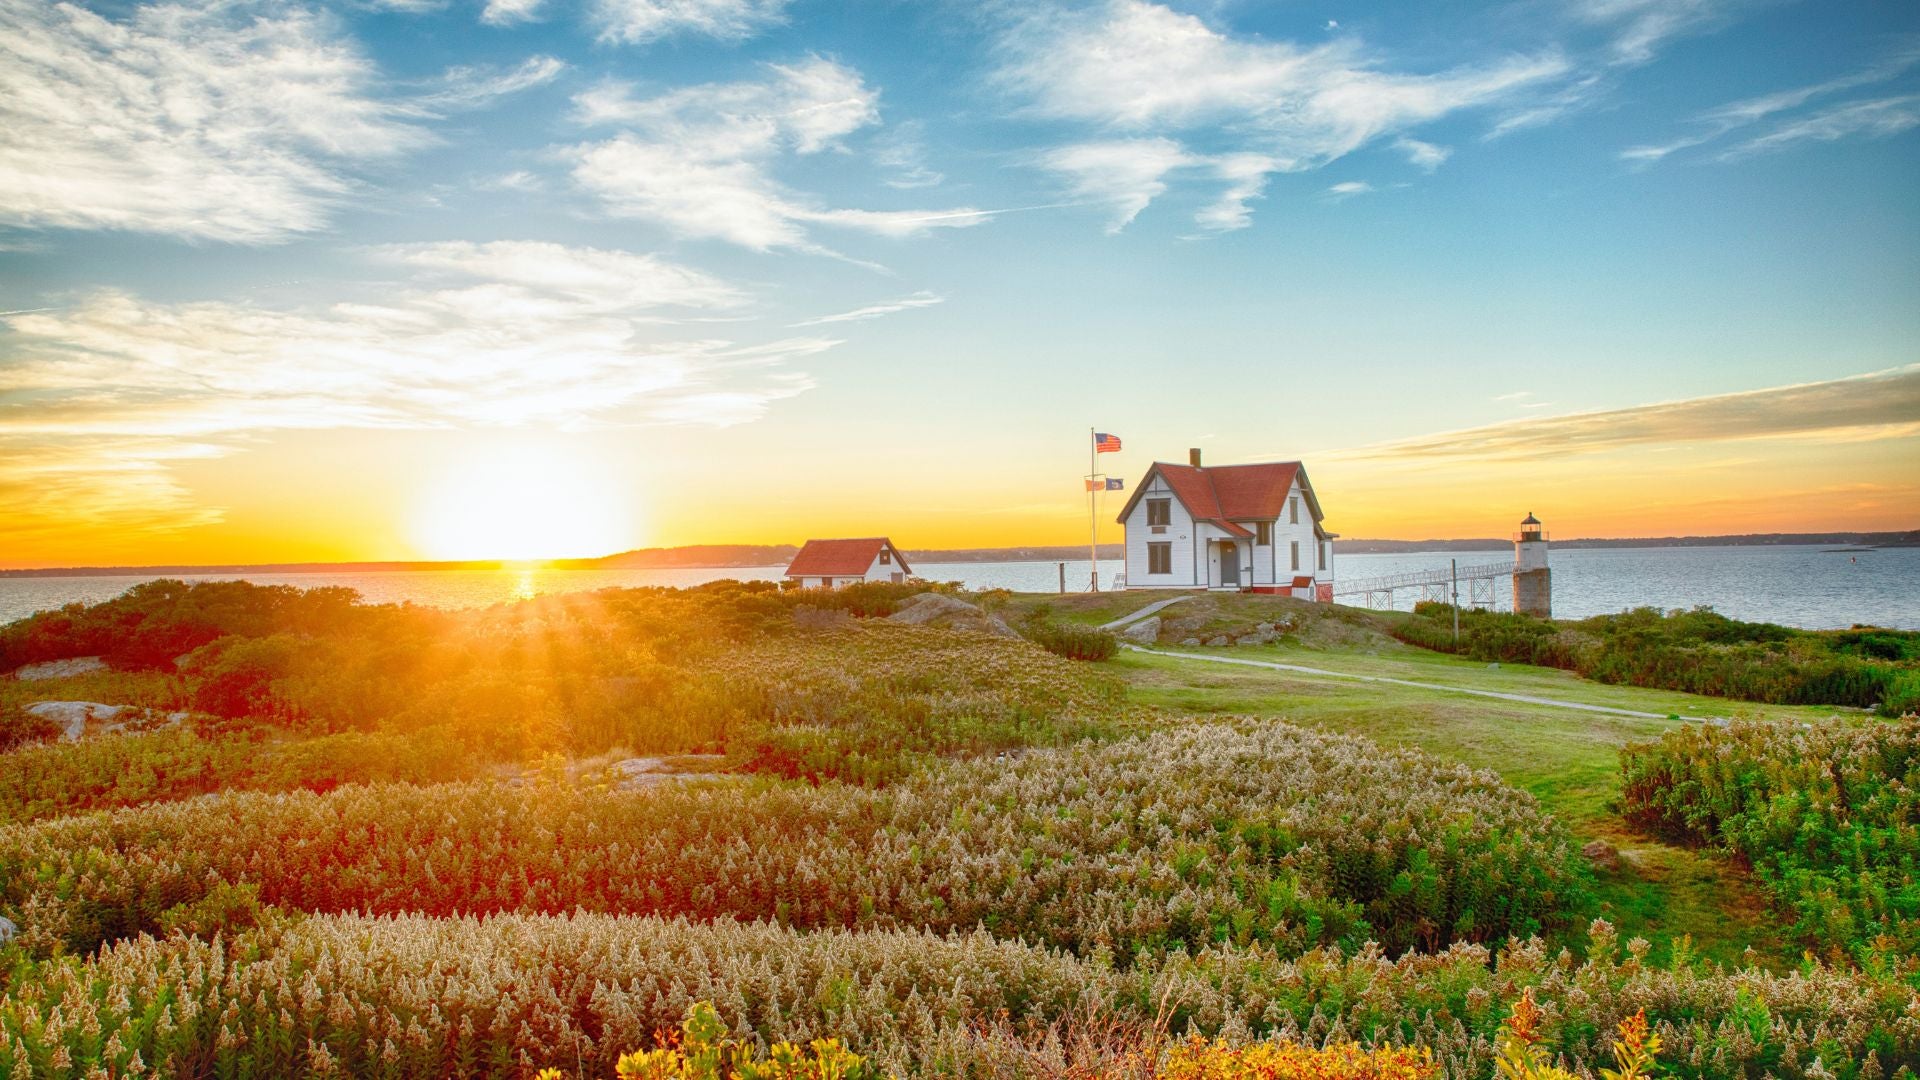 A house, a flower field, and a sunset in East Booth Bay, ME. - History By Mail